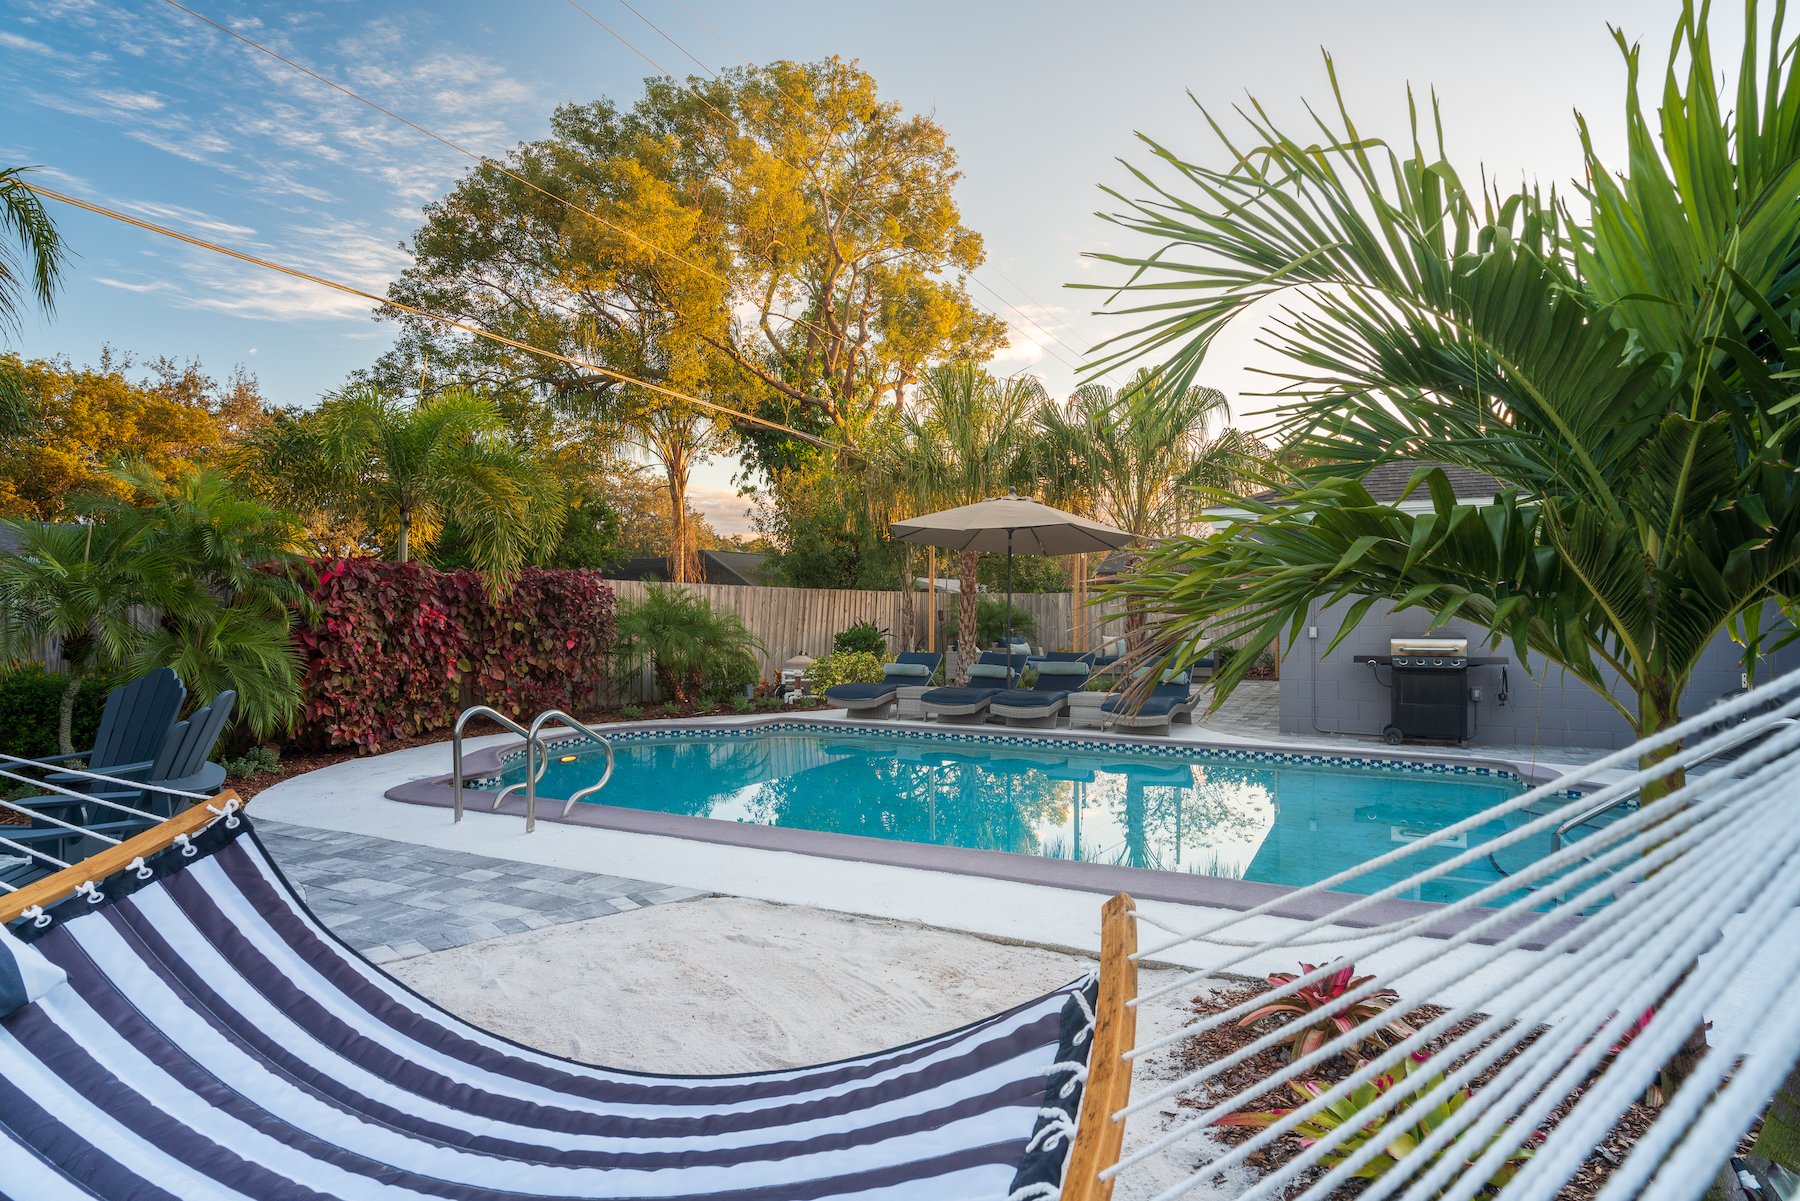 backyard landscape with pool and palm trees